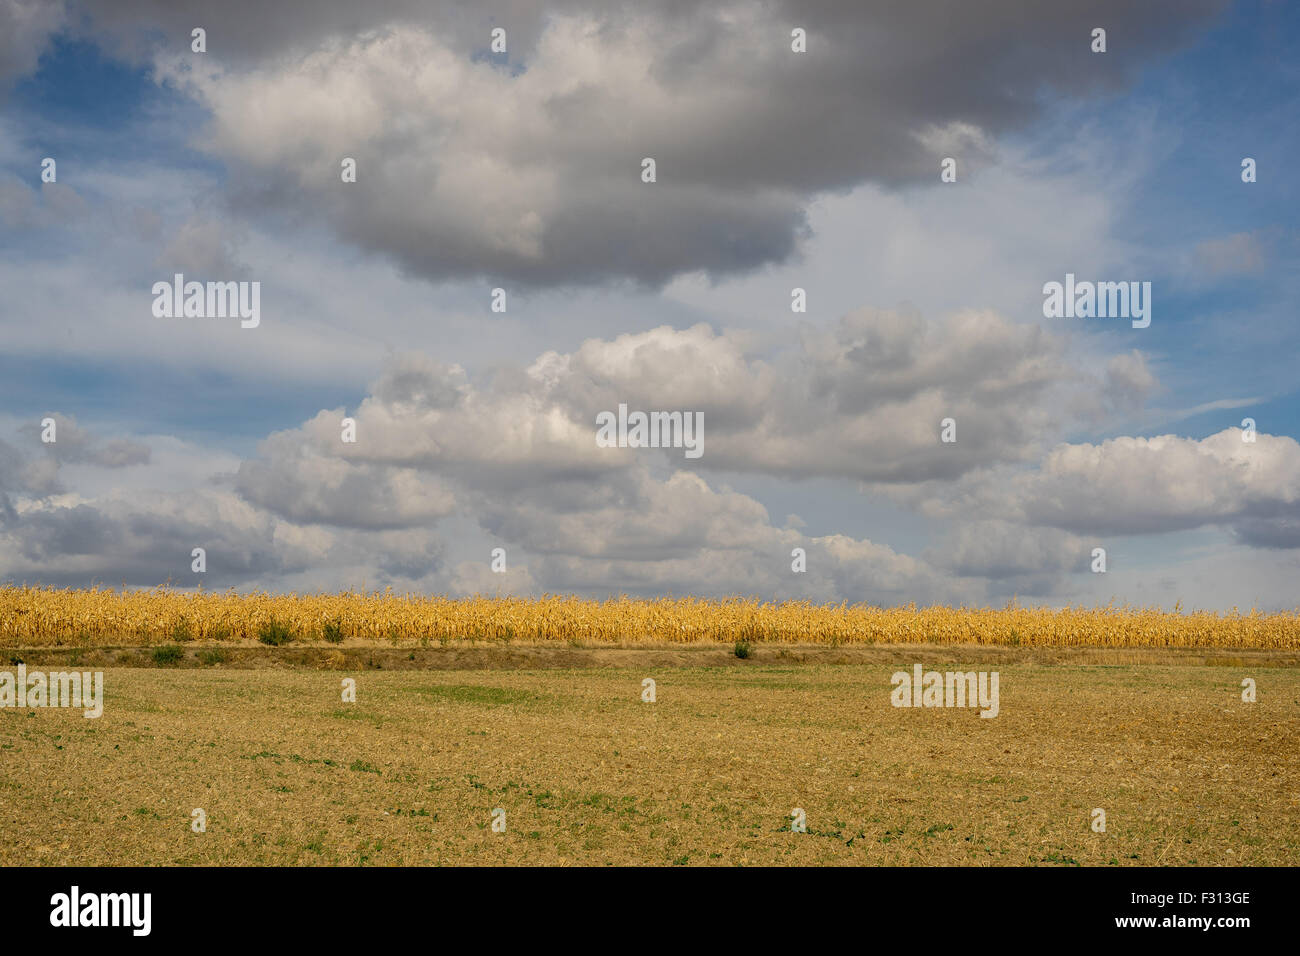 White cumulonimbus clouds in the blue sky over dry corn fields Lower Silesia Poland Stock Photo